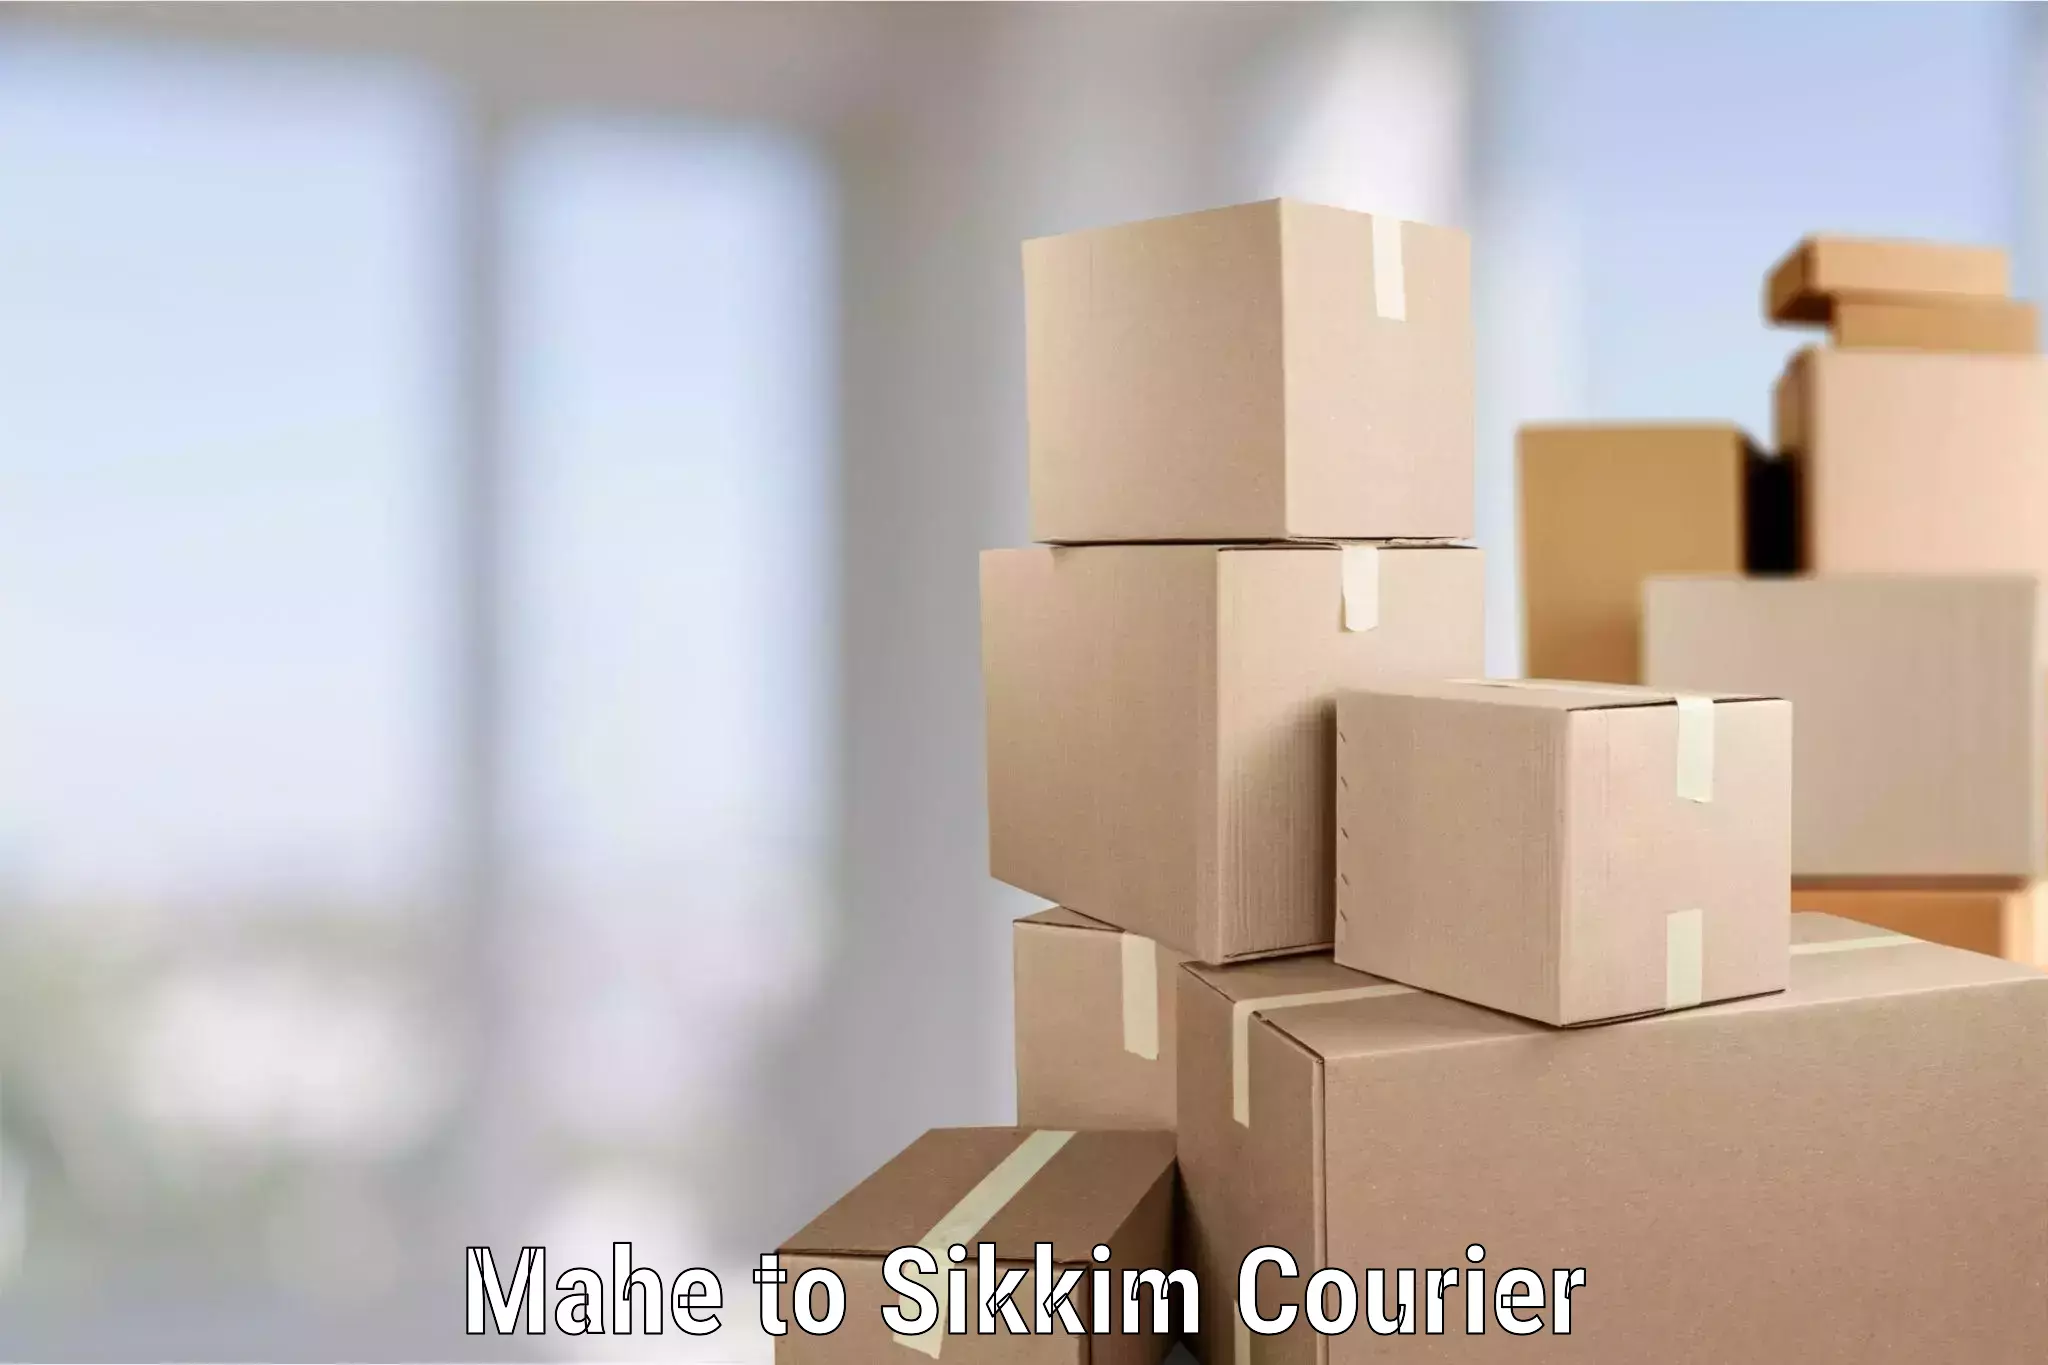 Professional movers in Mahe to Sikkim